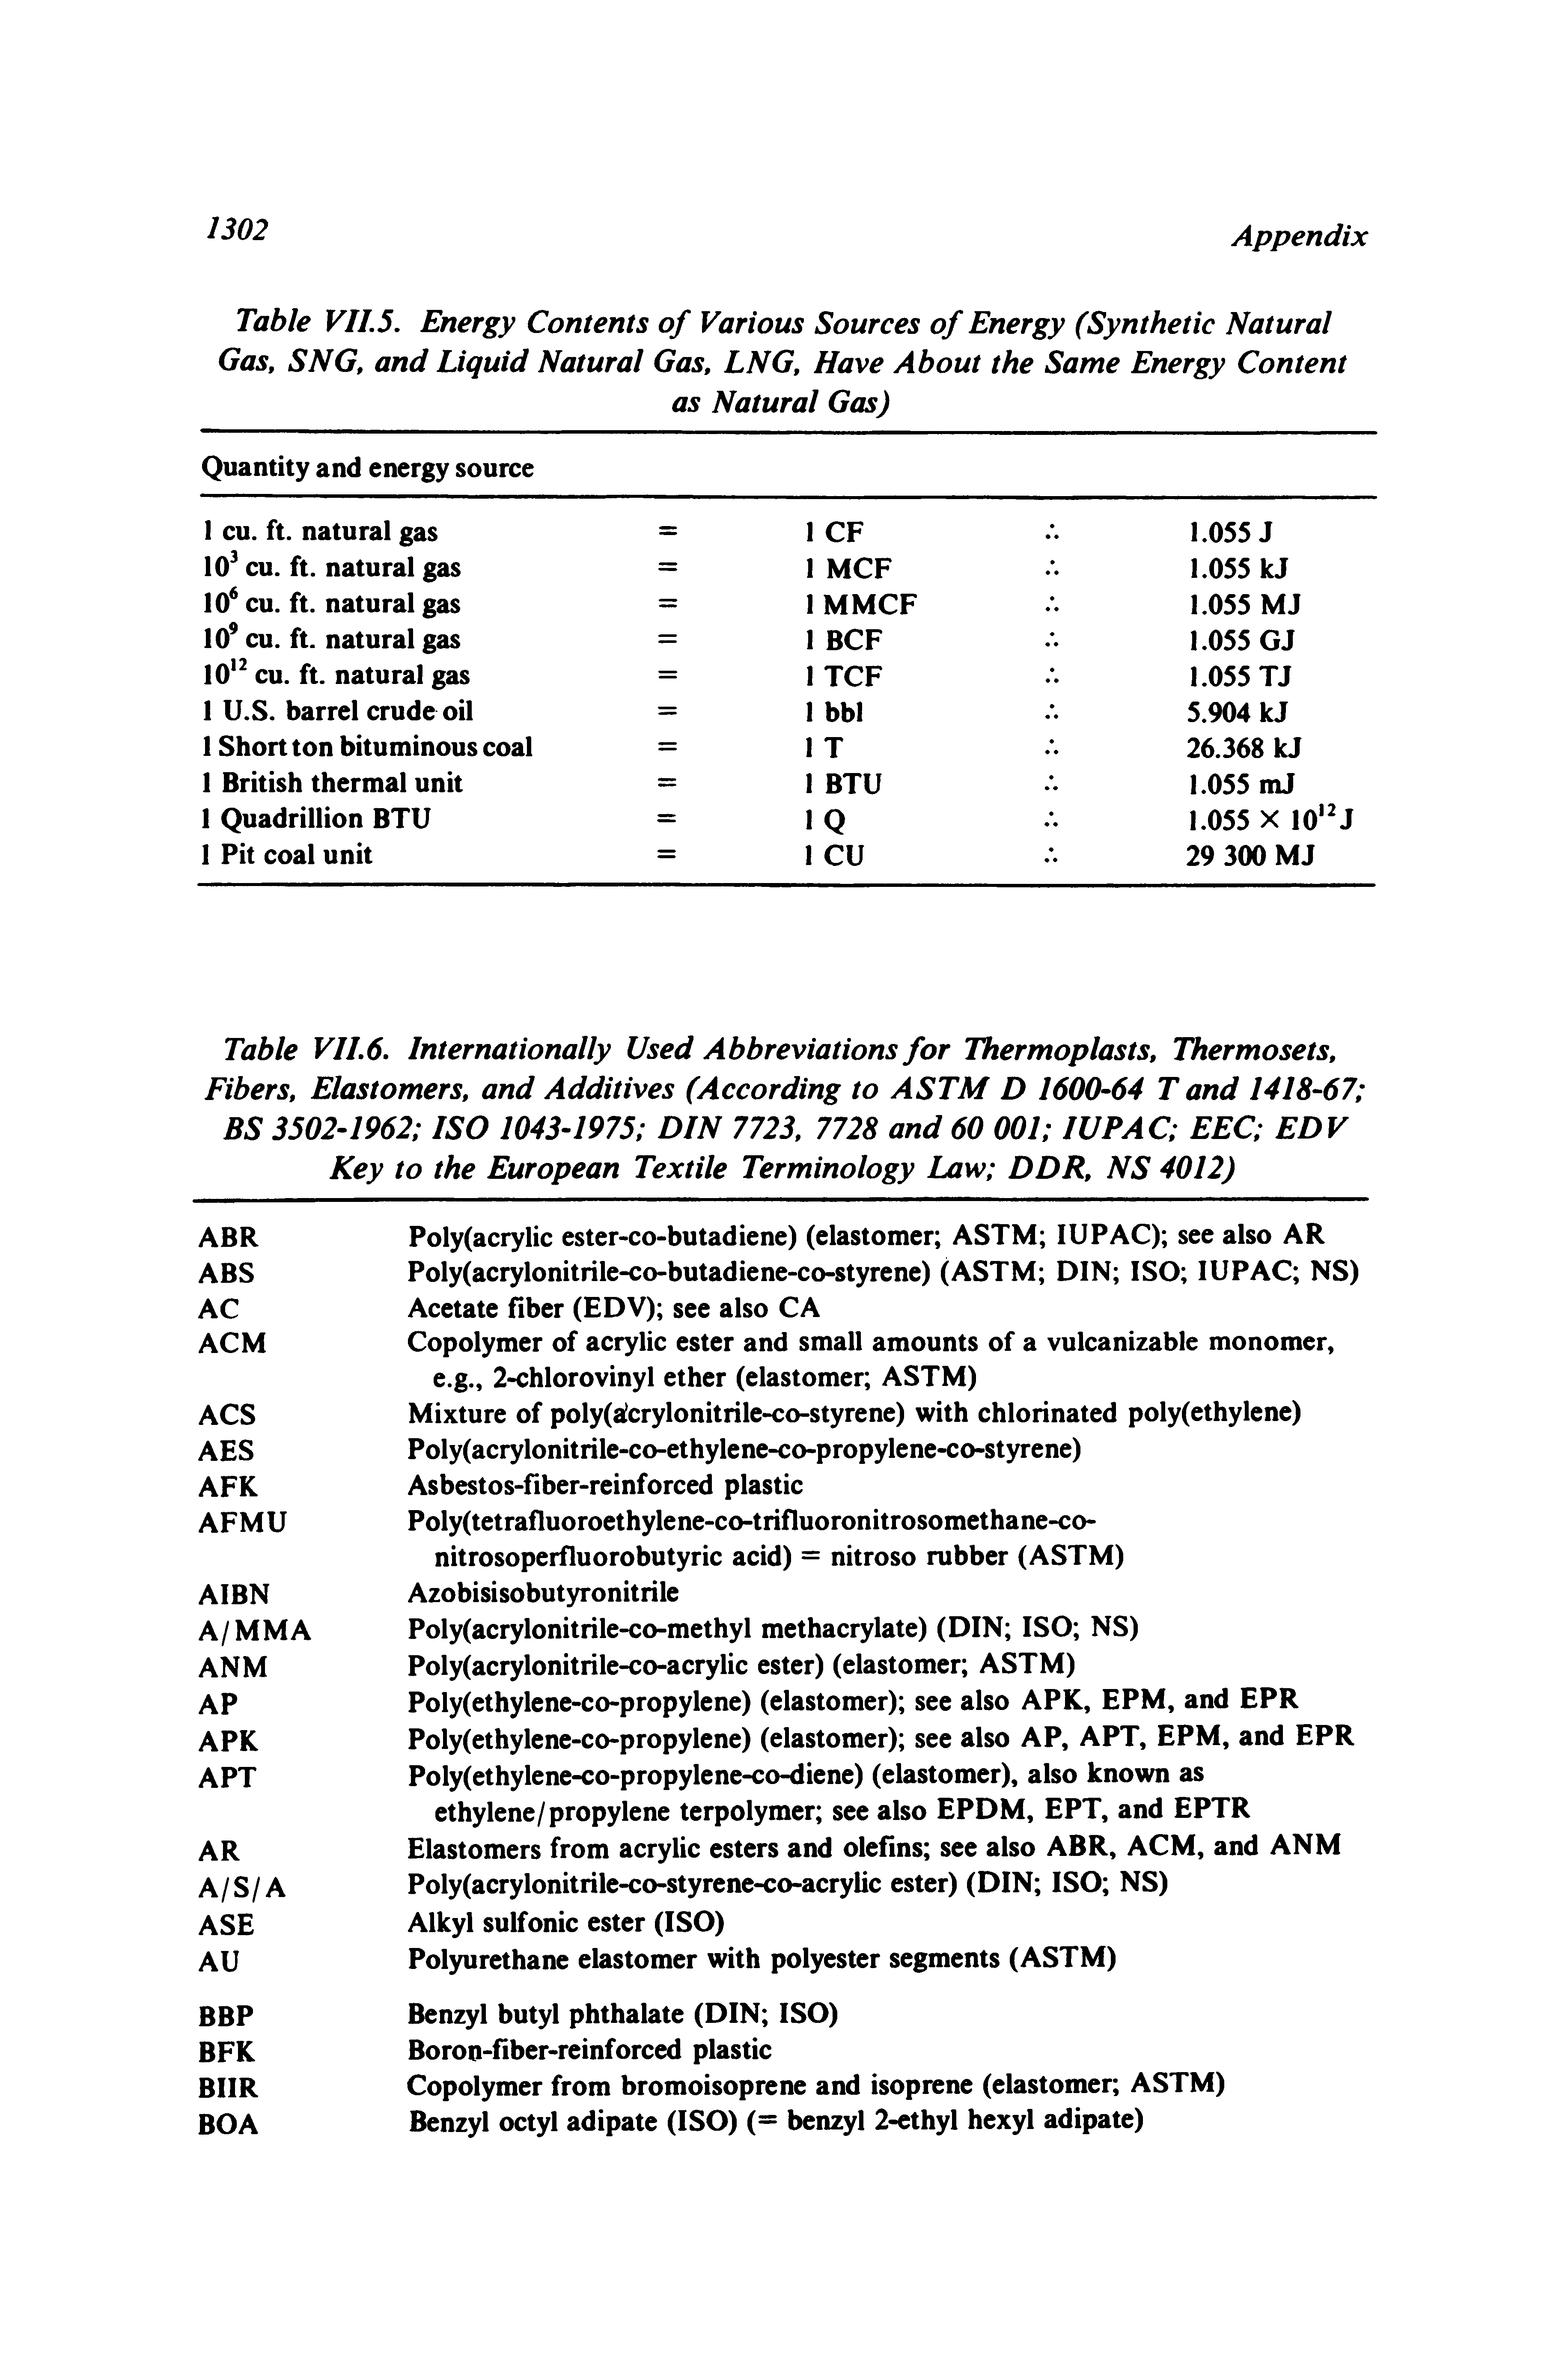 Table VII.5, Energy Contents of Various Sources of Energy (Synthetic Natural Gas, SNG, and Liquid Natural Gas, LNG, Have About the Same Energy Content...